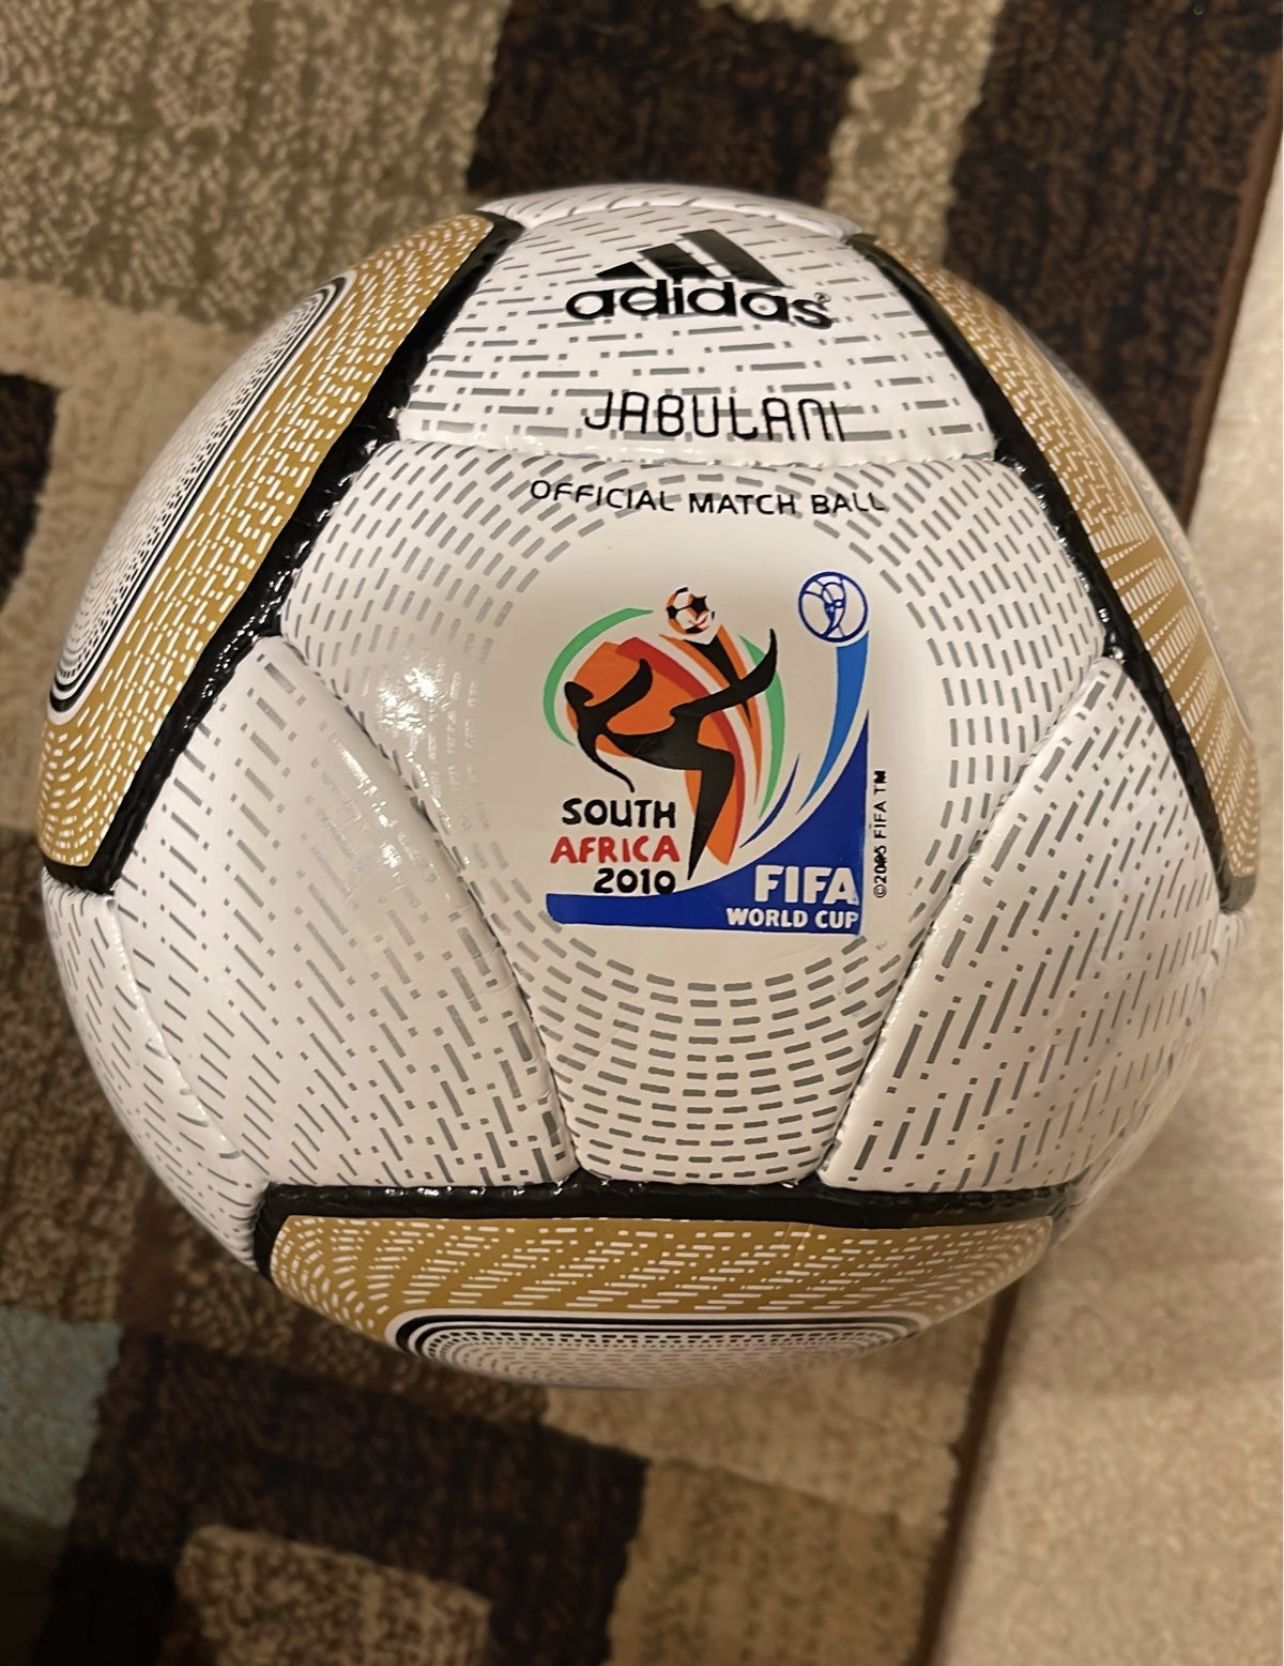 Jabulani Final 2010 FIFA World Cup Ball | MB | Size 5 for in Lake Forest, IL - OfferUp